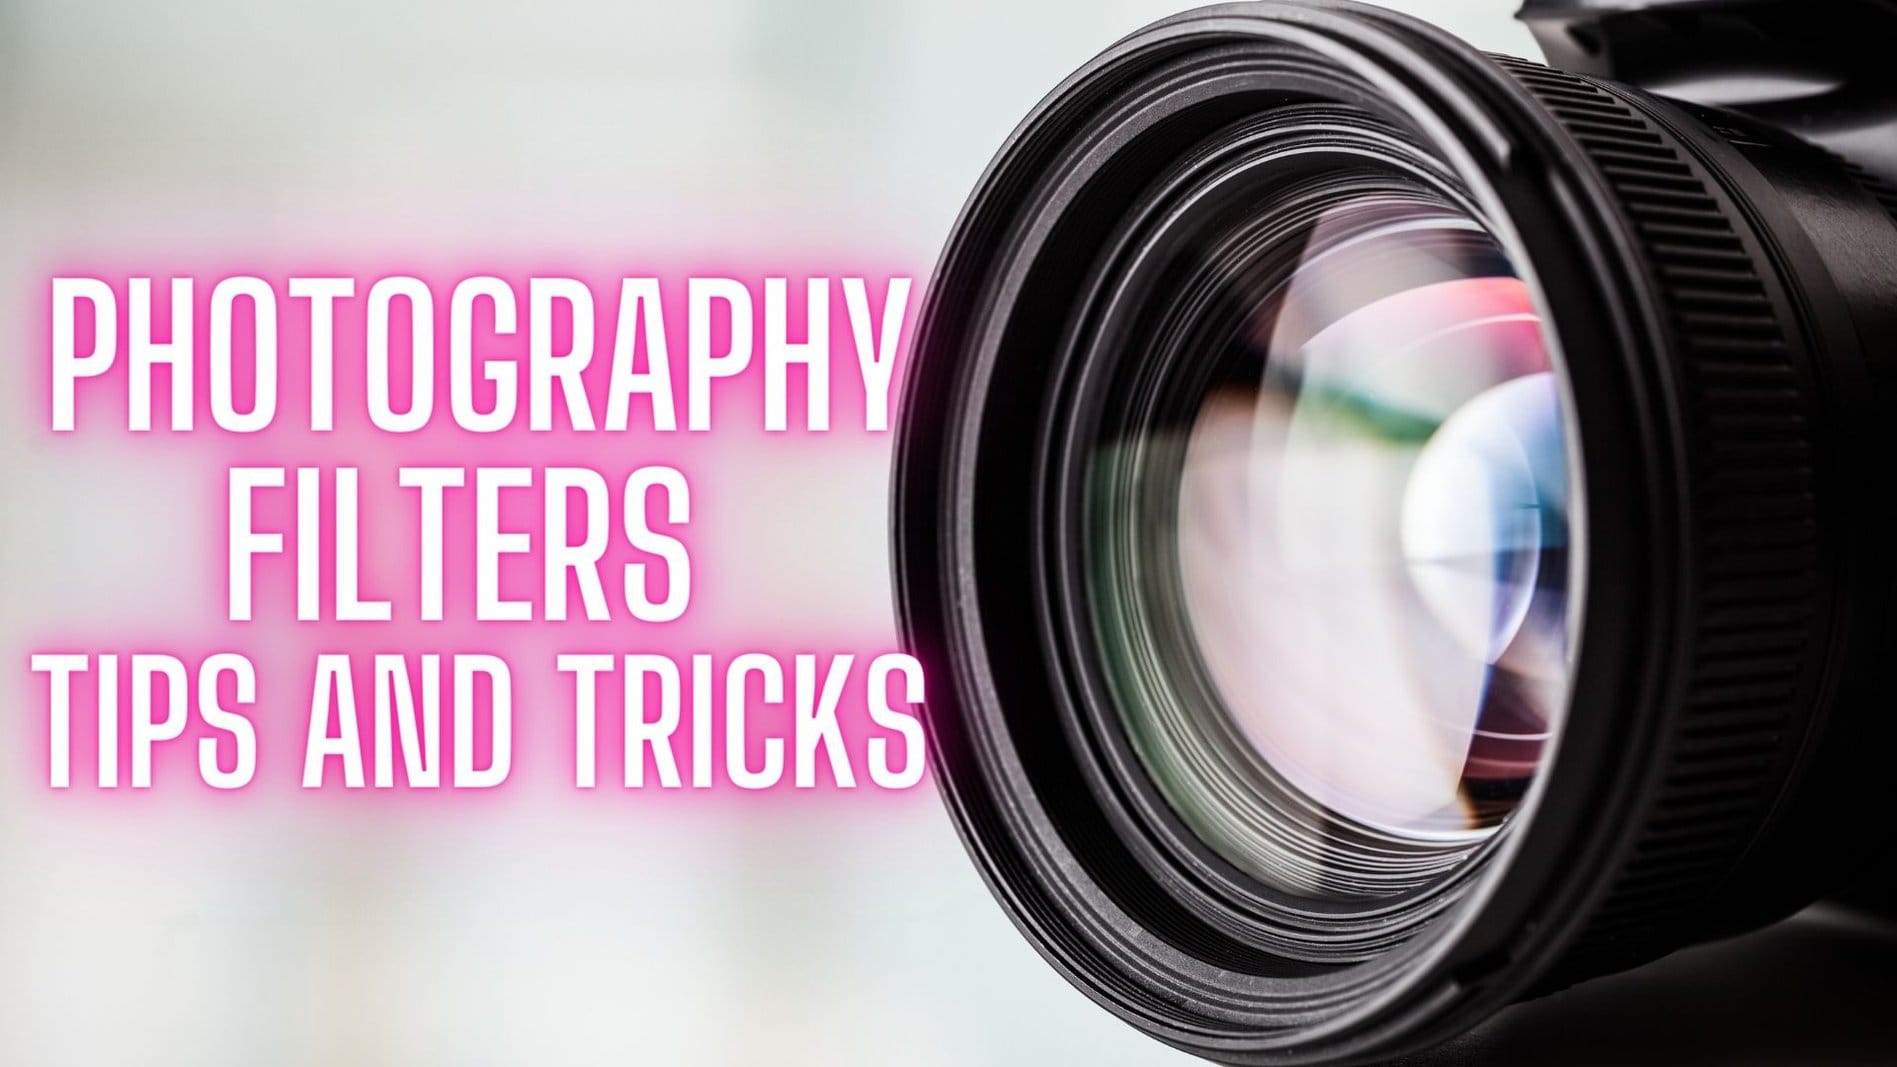 Photography filters tips and tricks